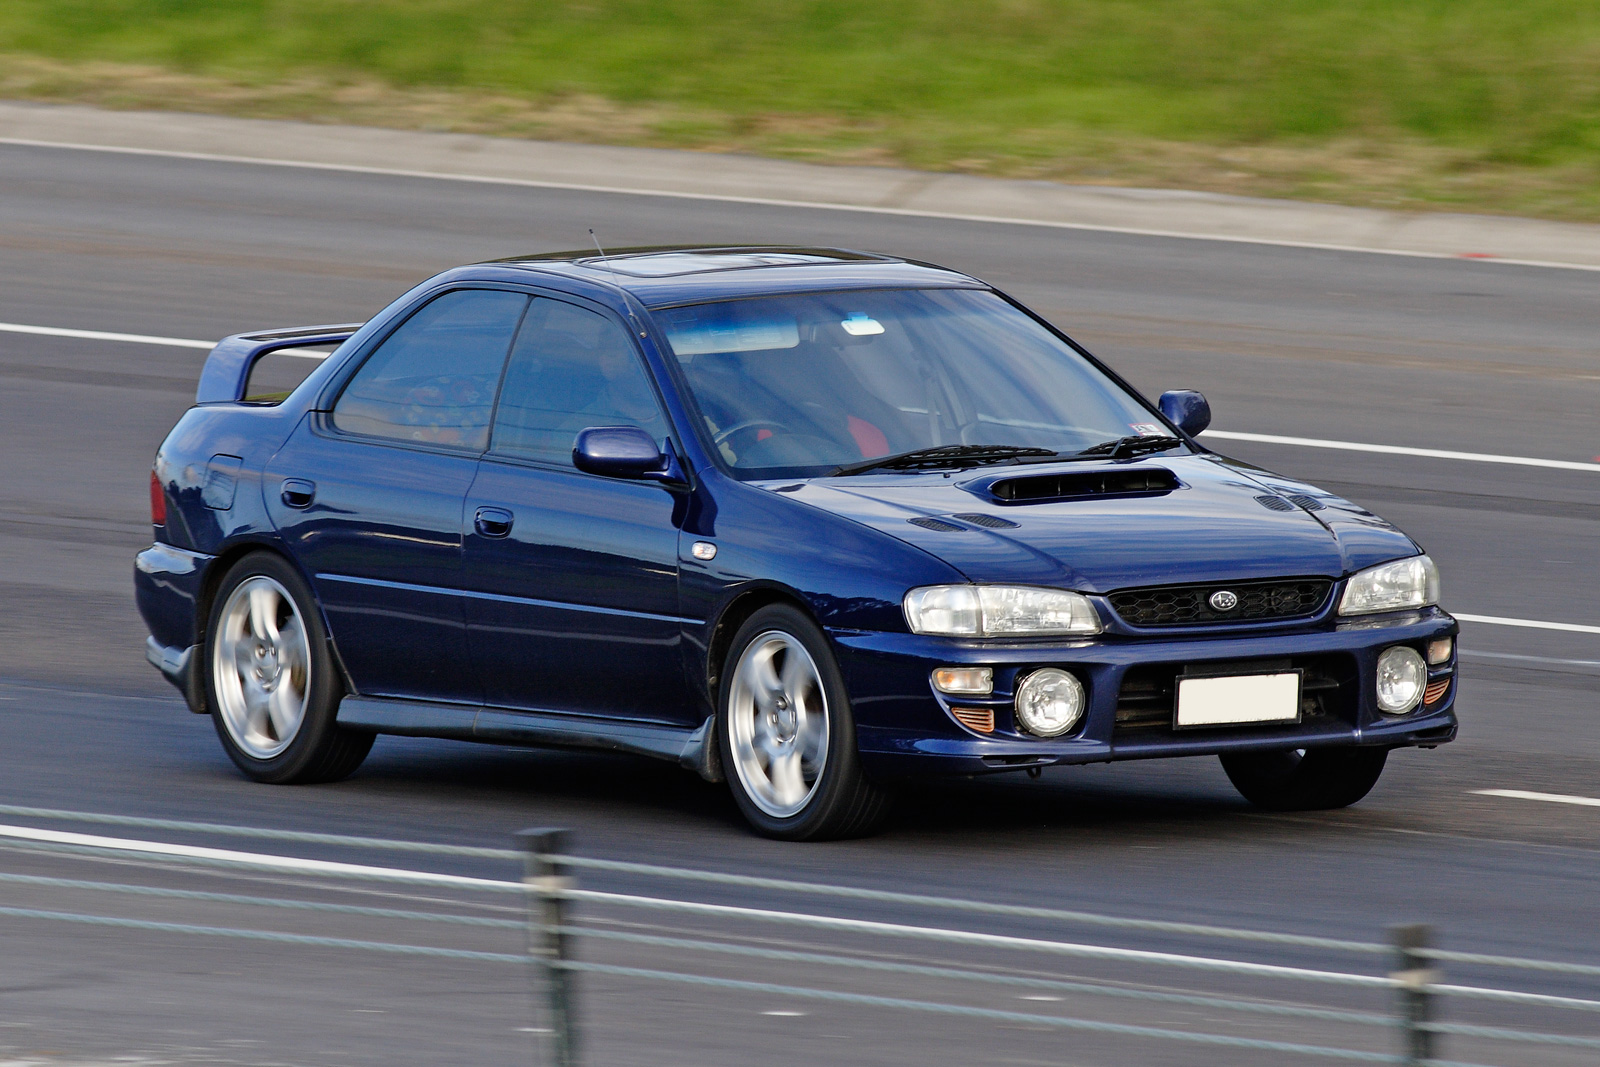 Subaru Impreza 1990 Review, Amazing Pictures and Images